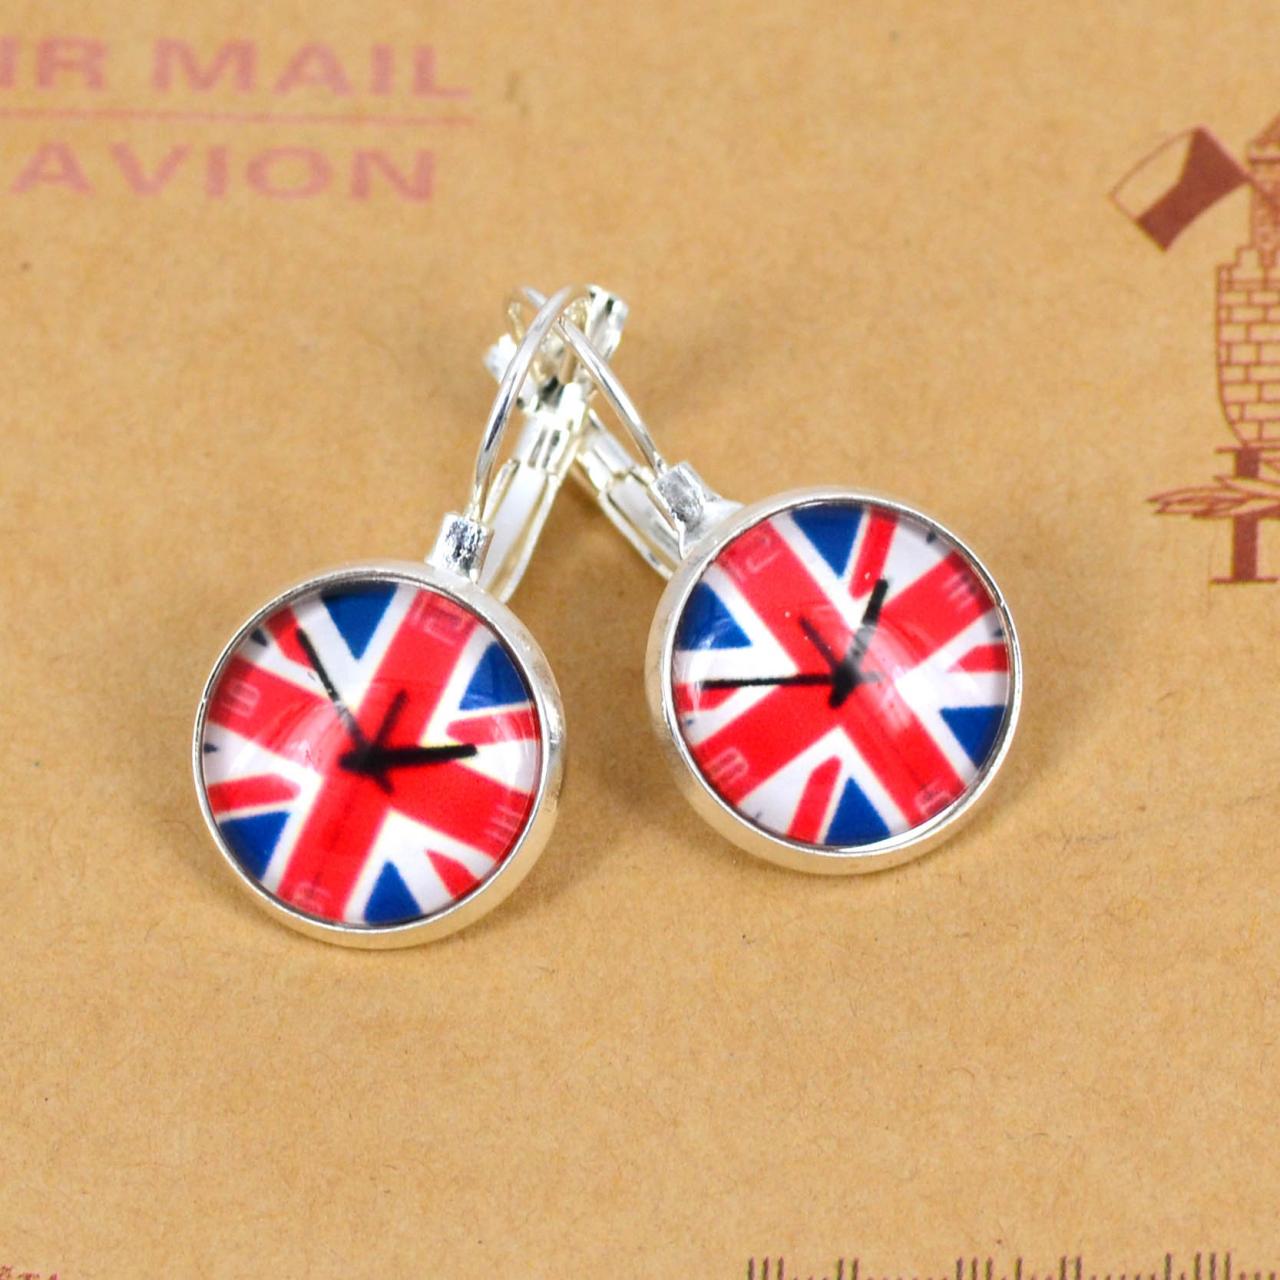 Cabochon Earrings Silver Plated,photo Glass Dome Earrings French Leverback Dangle Earrings,british Flag Clock Photo.#ib690